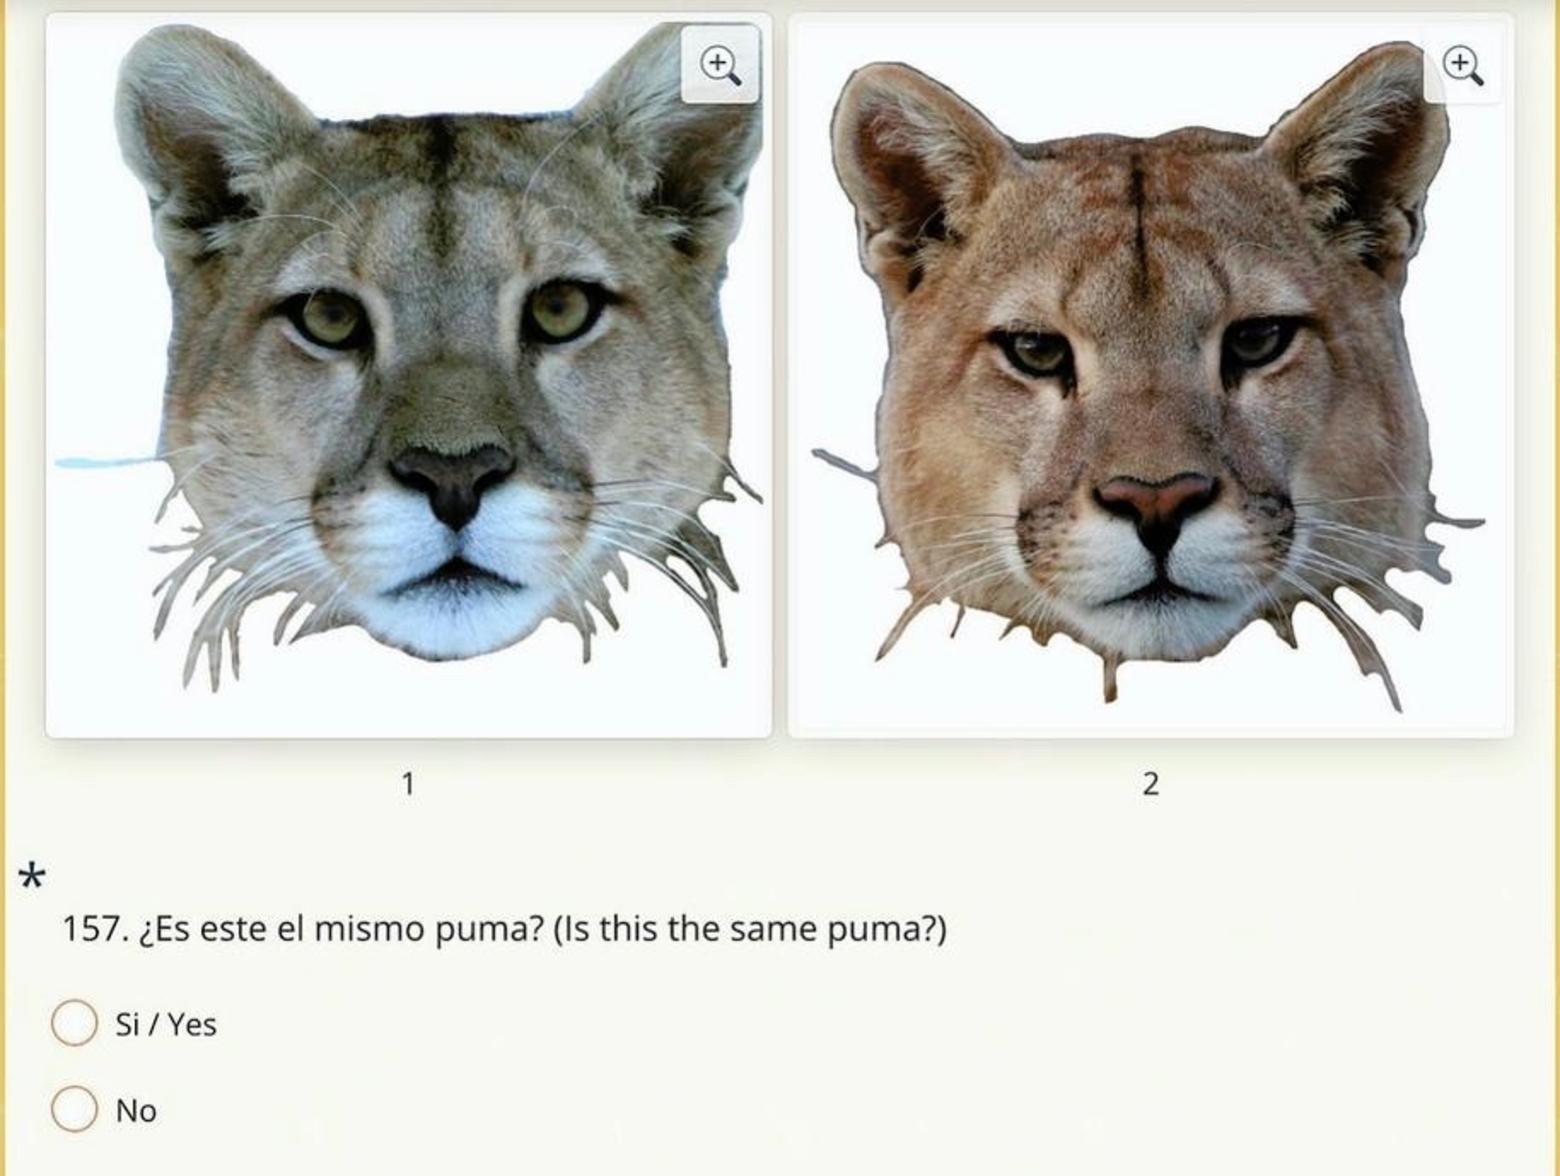 Above is an example of the test given to participants in the Panthera study to determine if they could determine if the two images, presented side by side, were the same puma. Graphic courtesy Panthera